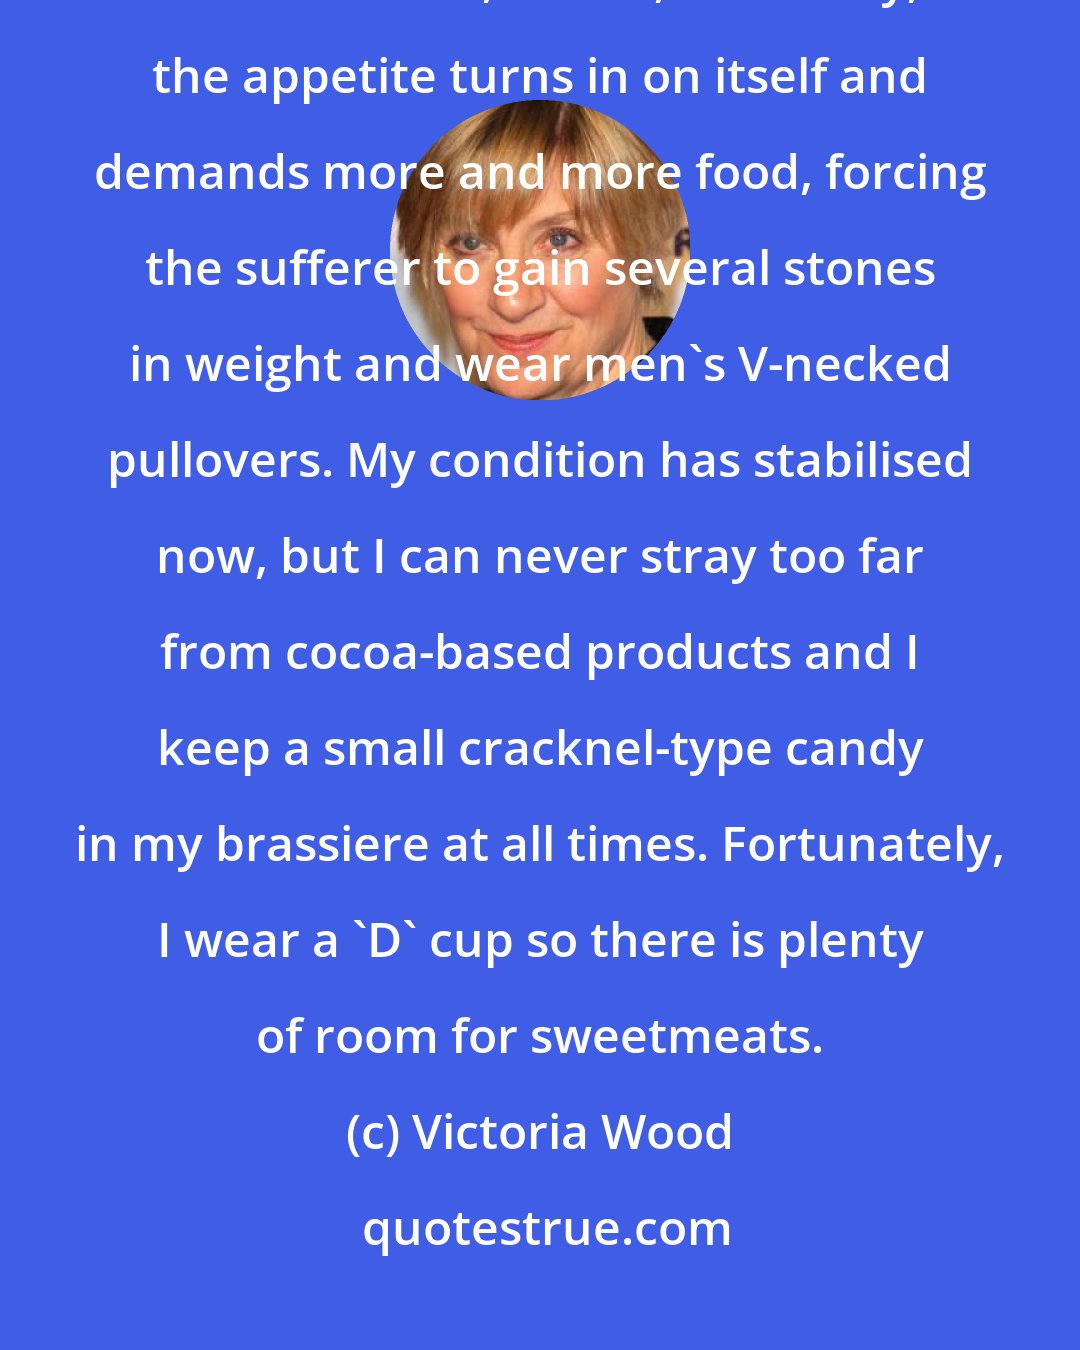 Victoria Wood: For years I was an undiagnosed anorexic, suffering from a little-known variant of the disease, where, freakishly, the appetite turns in on itself and demands more and more food, forcing the sufferer to gain several stones in weight and wear men's V-necked pullovers. My condition has stabilised now, but I can never stray too far from cocoa-based products and I keep a small cracknel-type candy in my brassiere at all times. Fortunately, I wear a 'D' cup so there is plenty of room for sweetmeats.